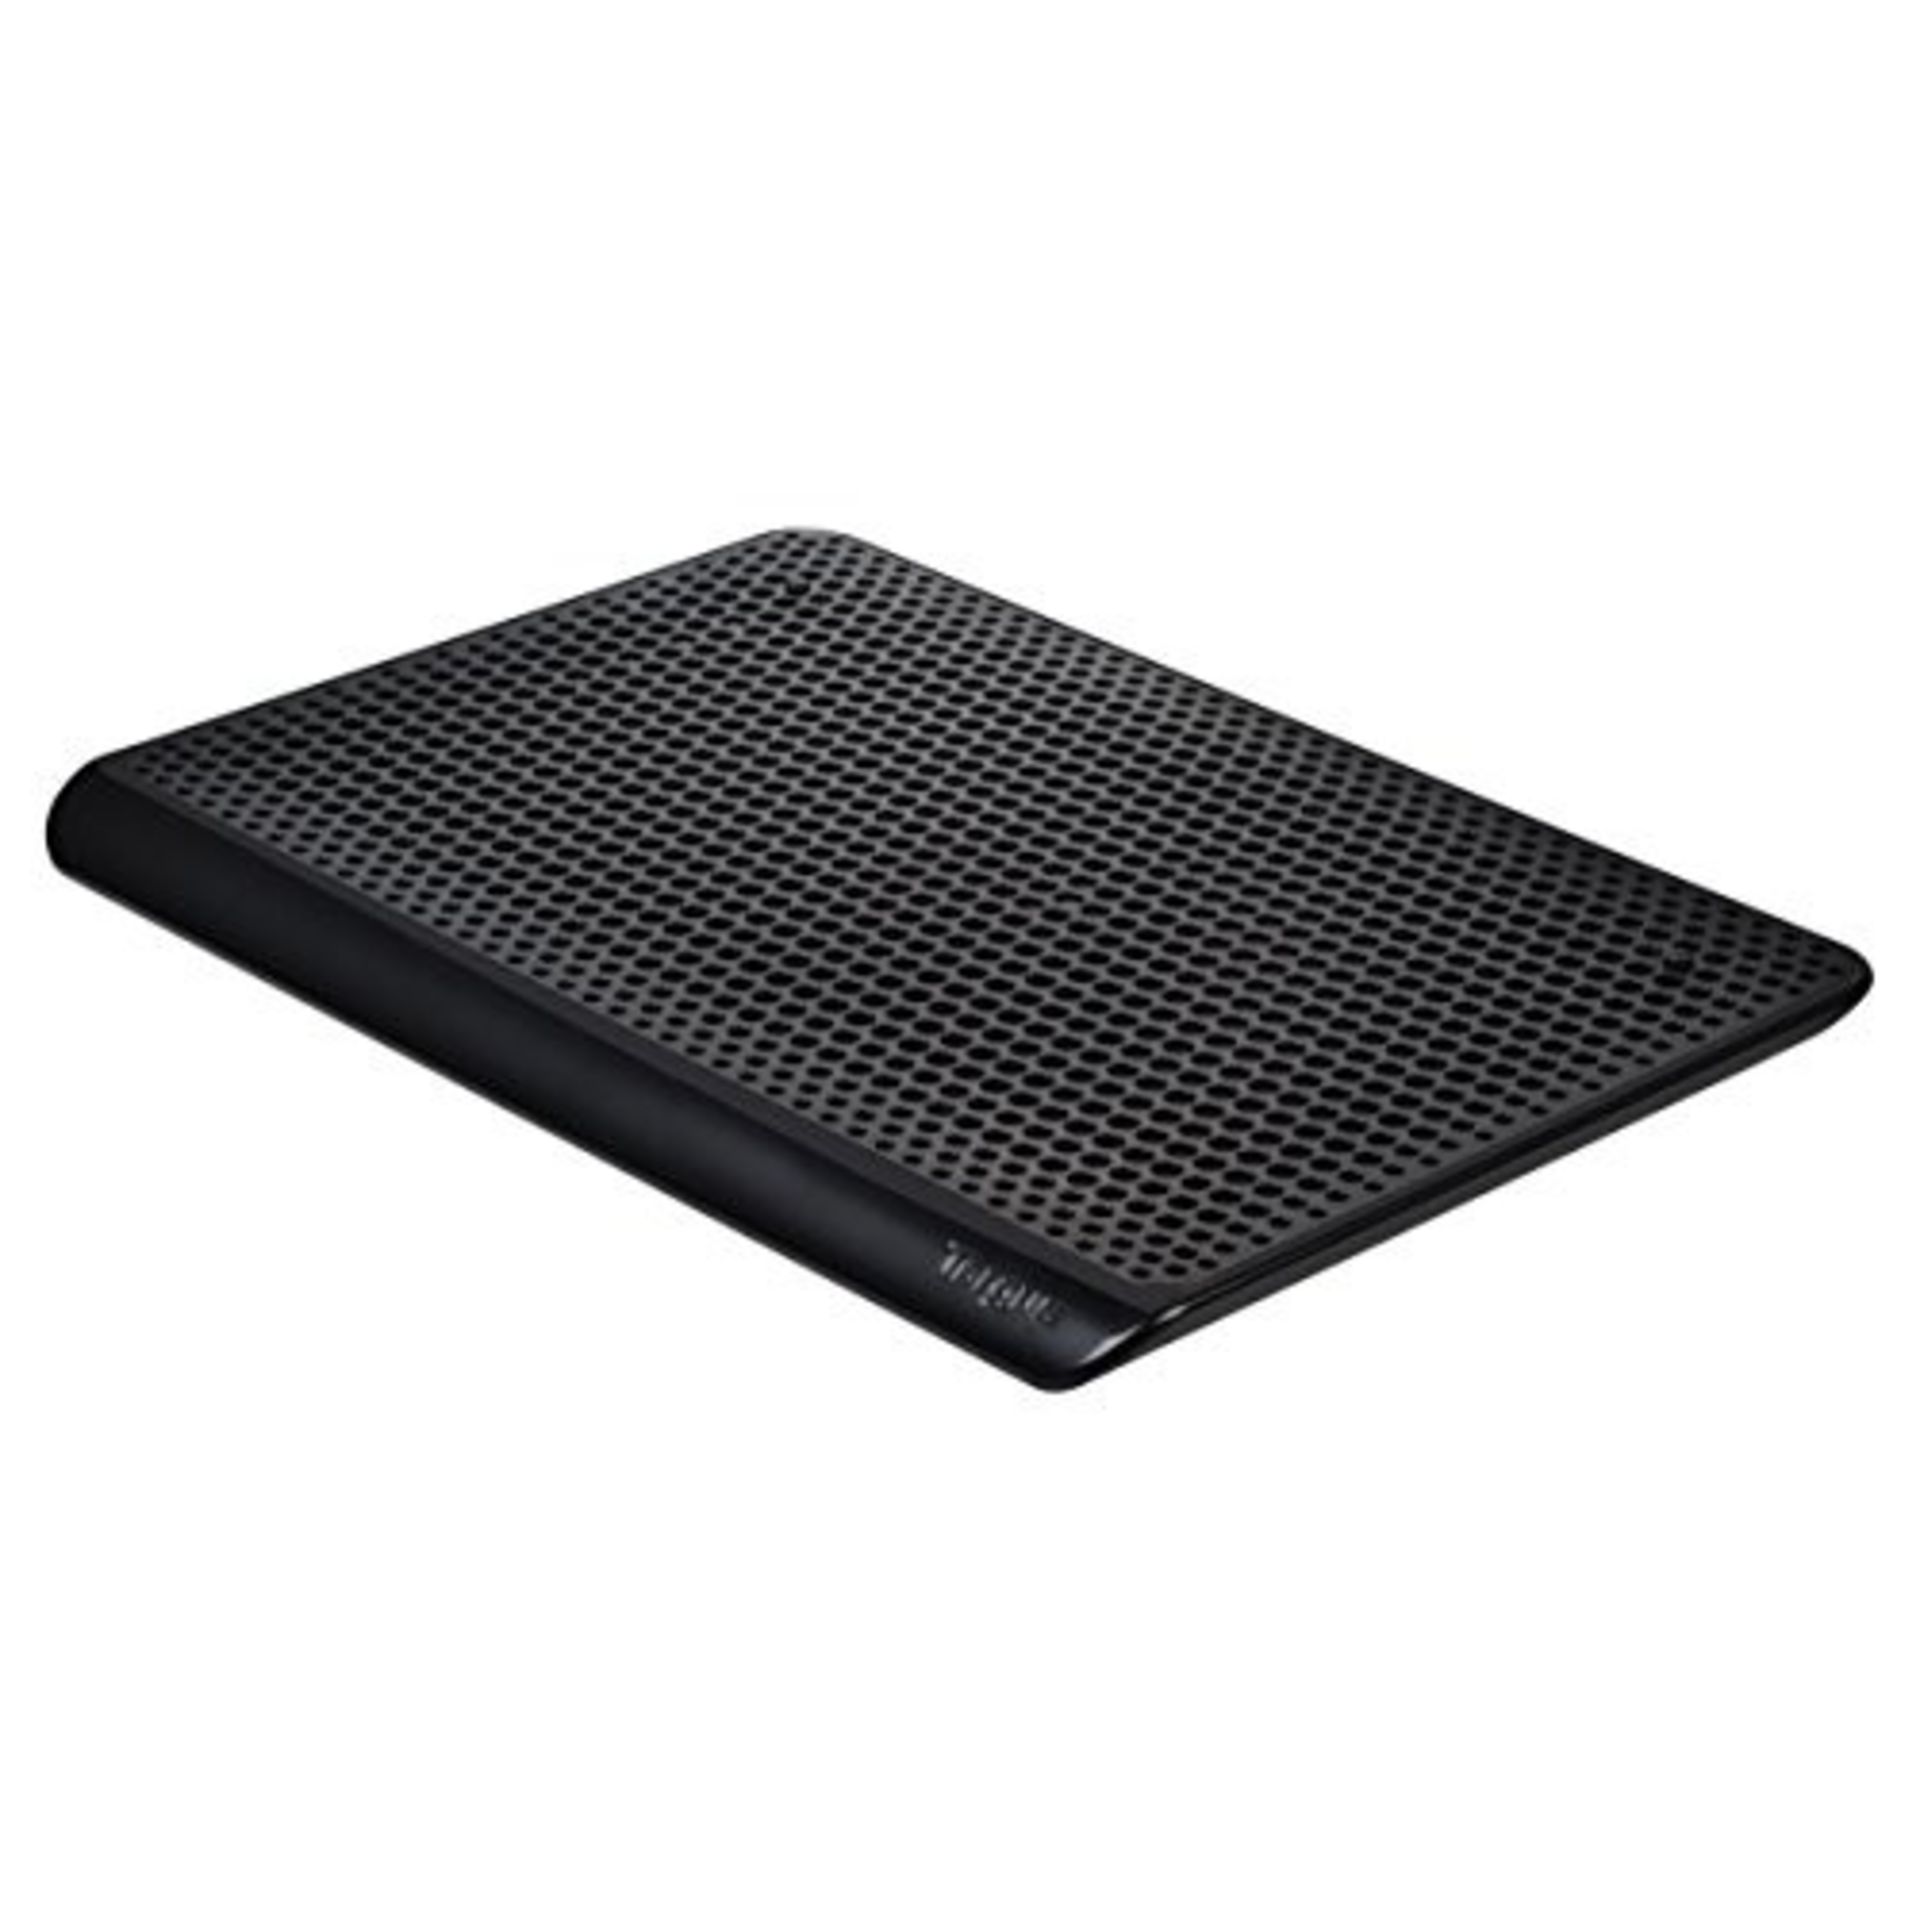 Targus Chill Mat Ultraslim Quiet and Portable Cooling Pad for Laptop, Black (AWE69EU) - Image 3 of 4